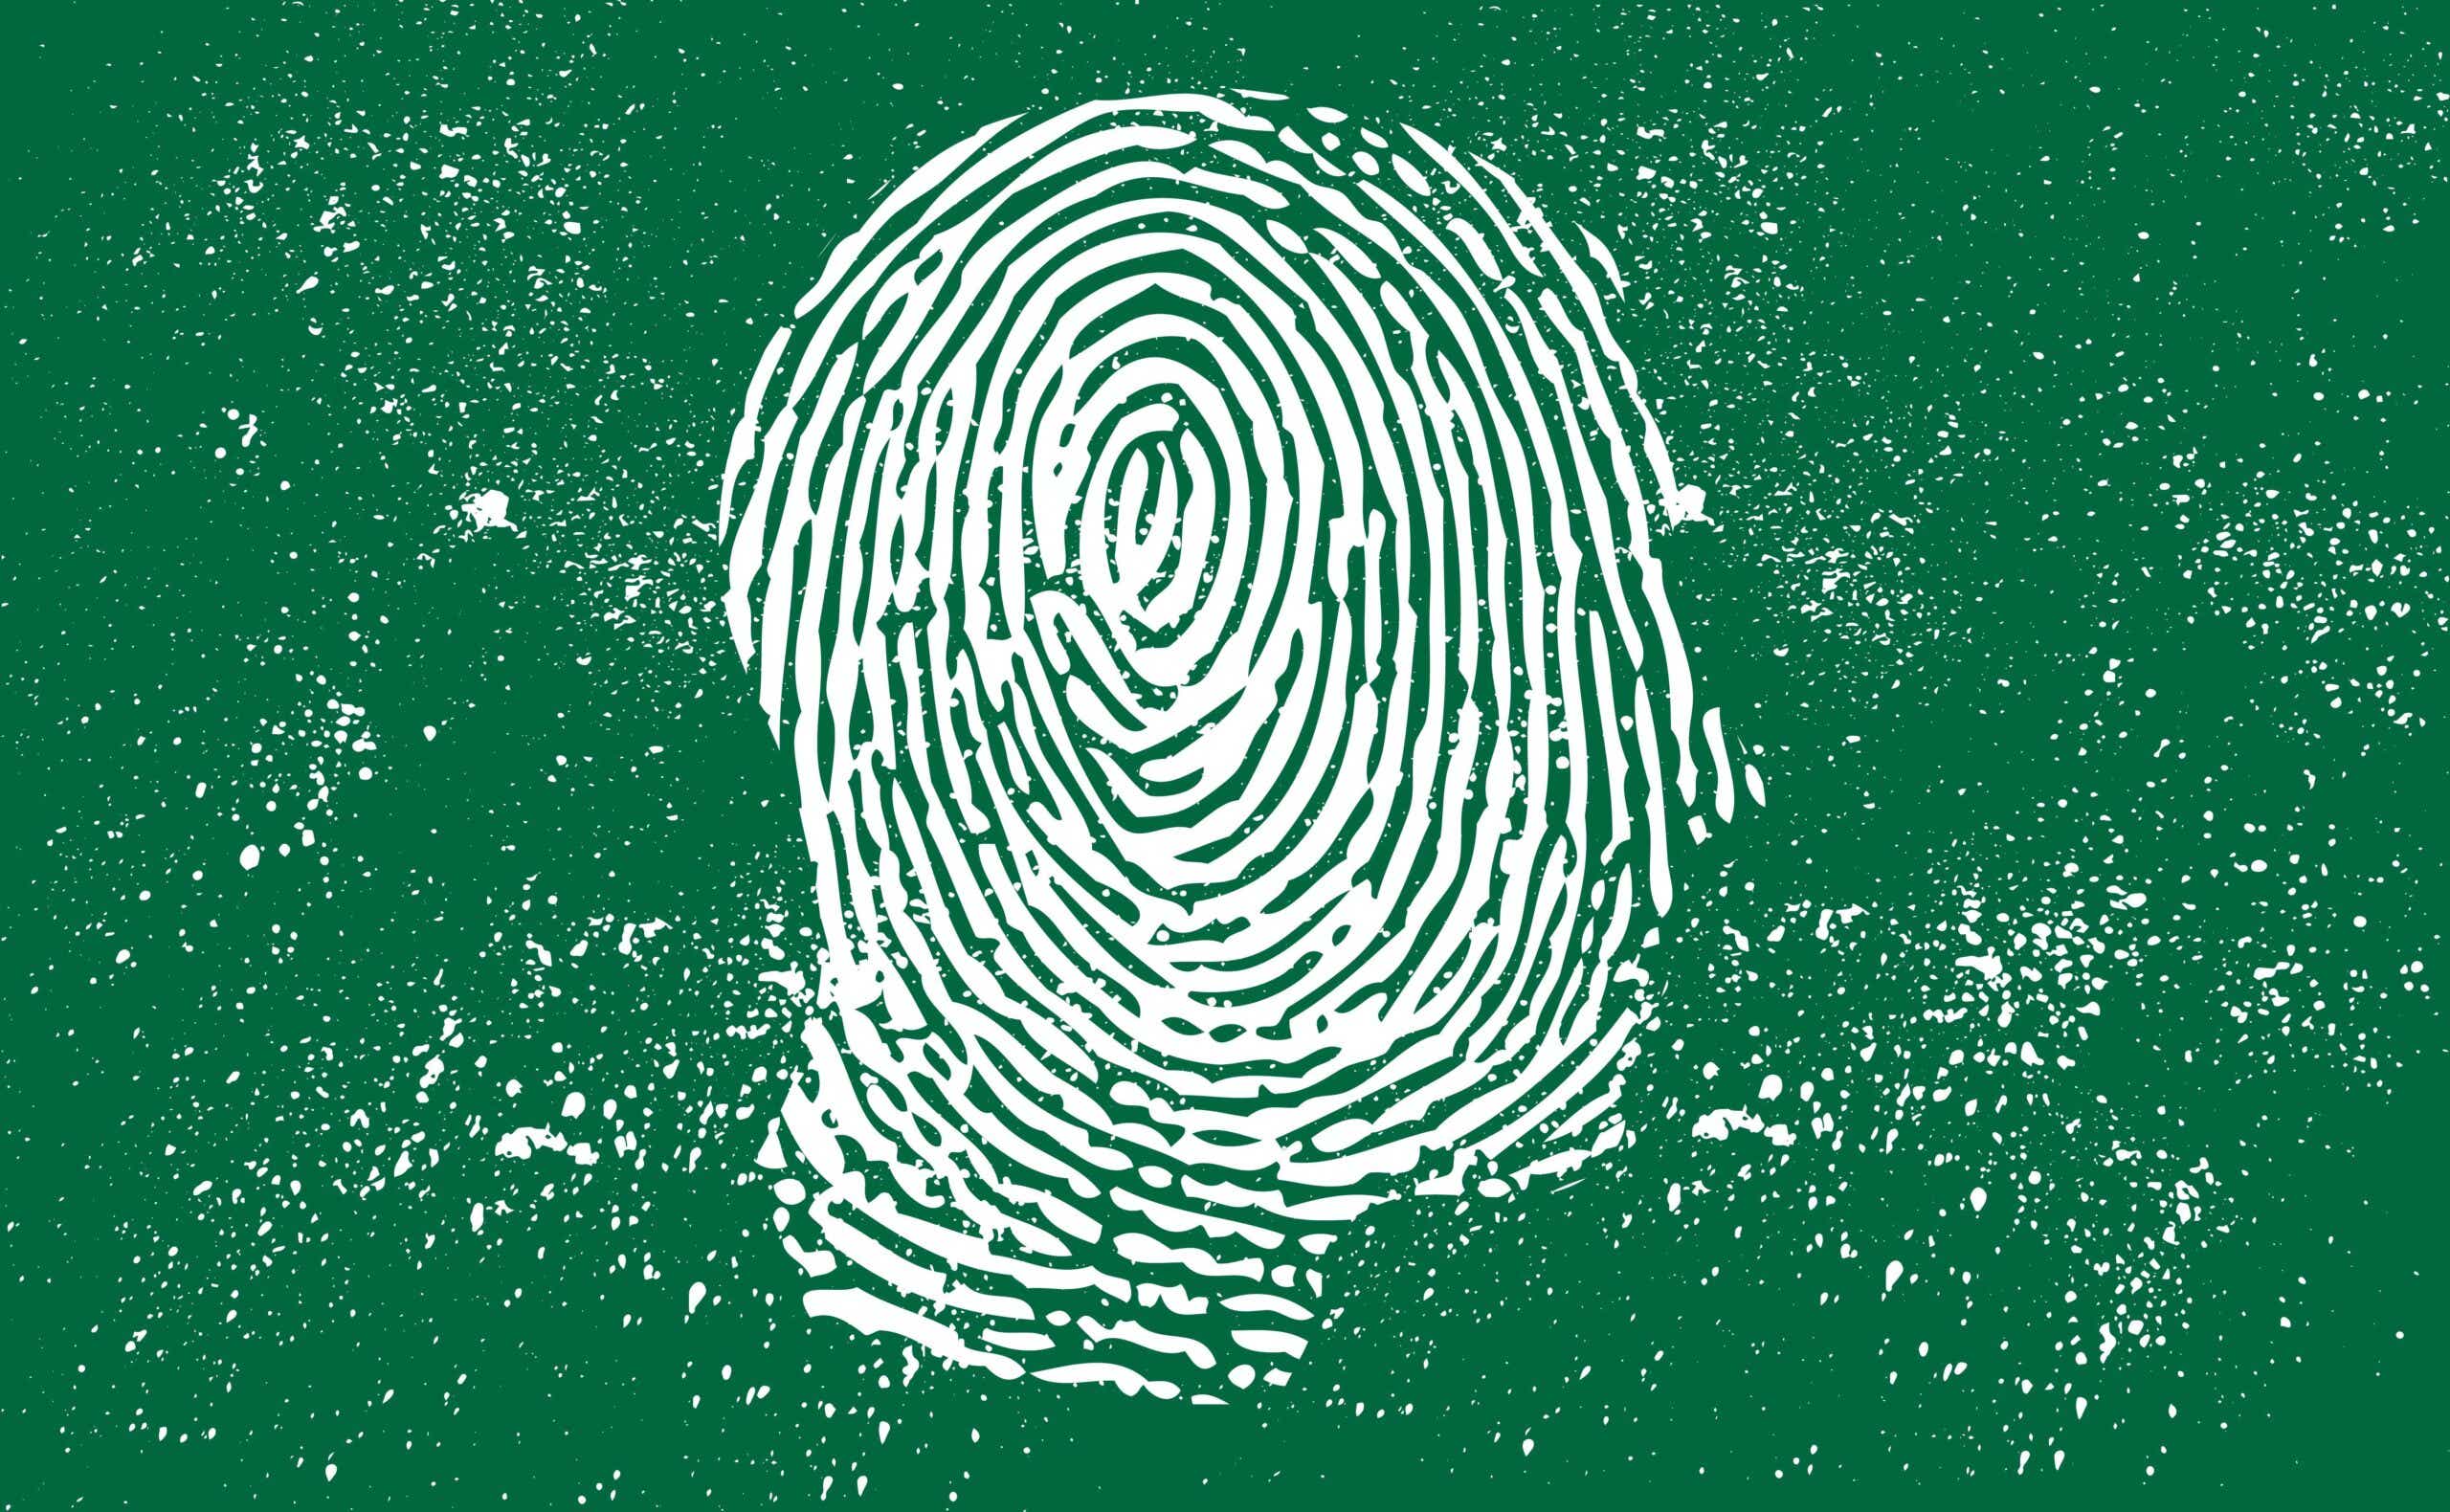 A face with a thumbprint inside